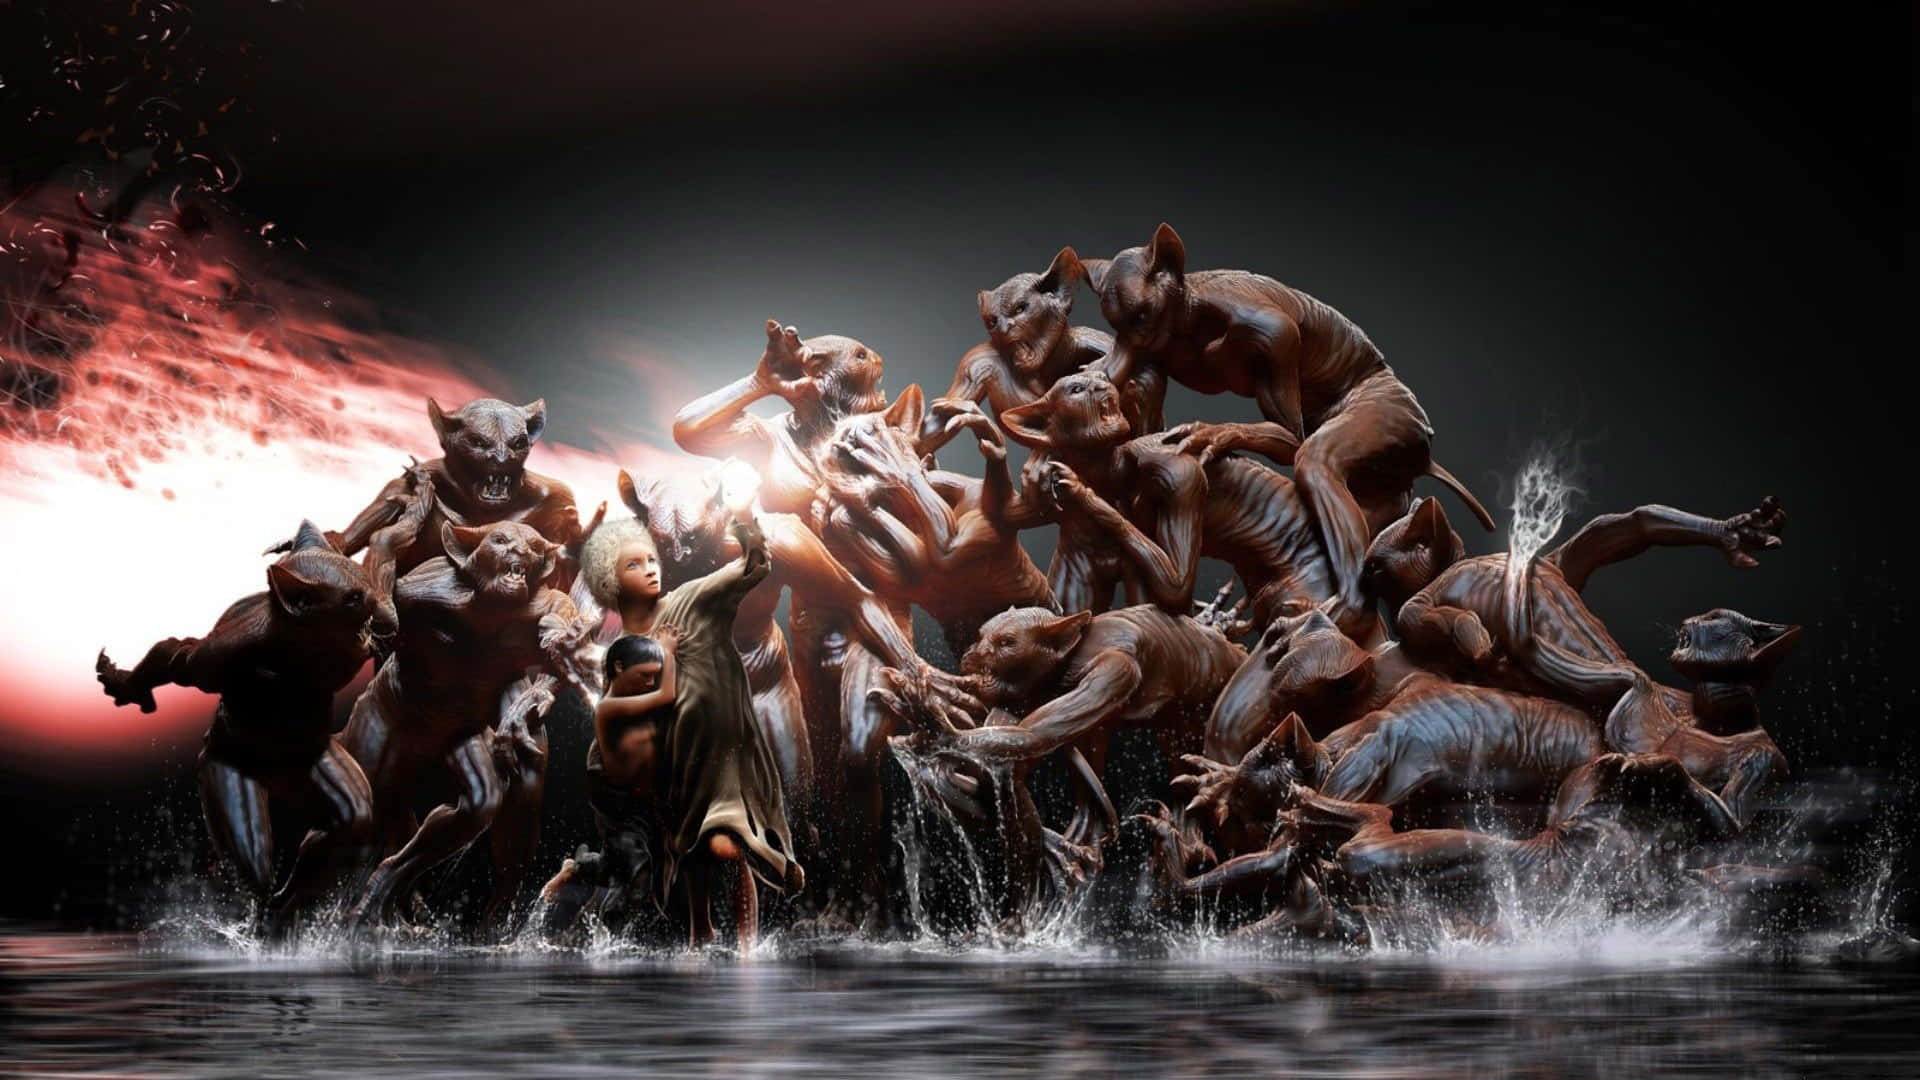 Weird Monsters Fighting On Water Picture